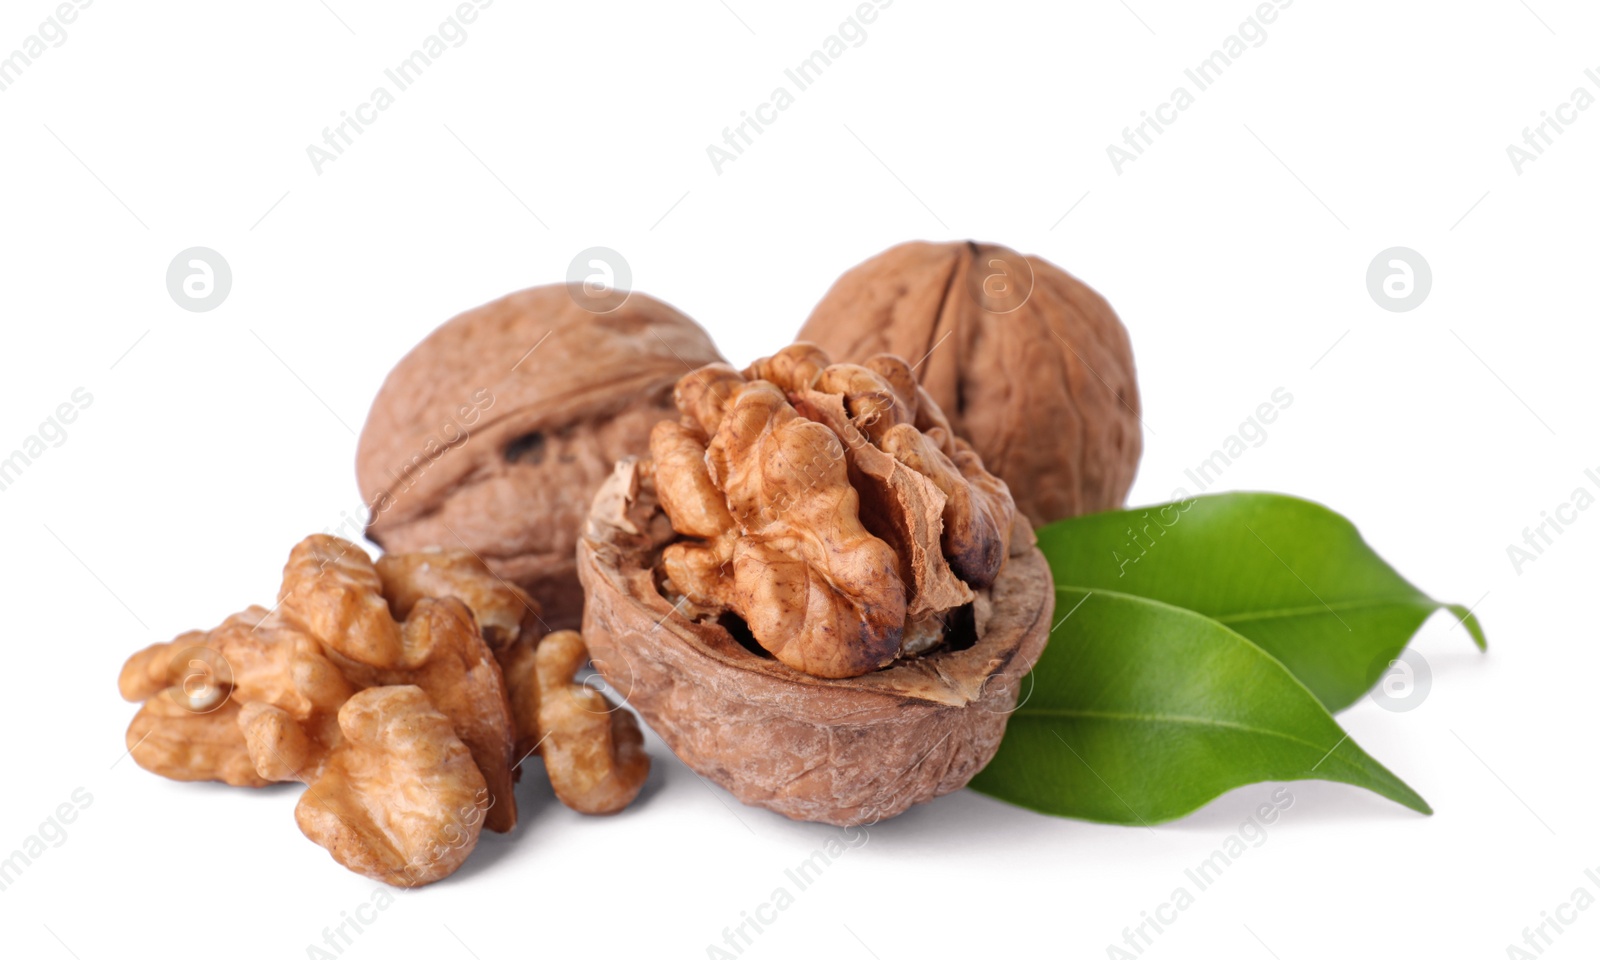 Photo of Walnuts in shell, kernels and green leaves on white background